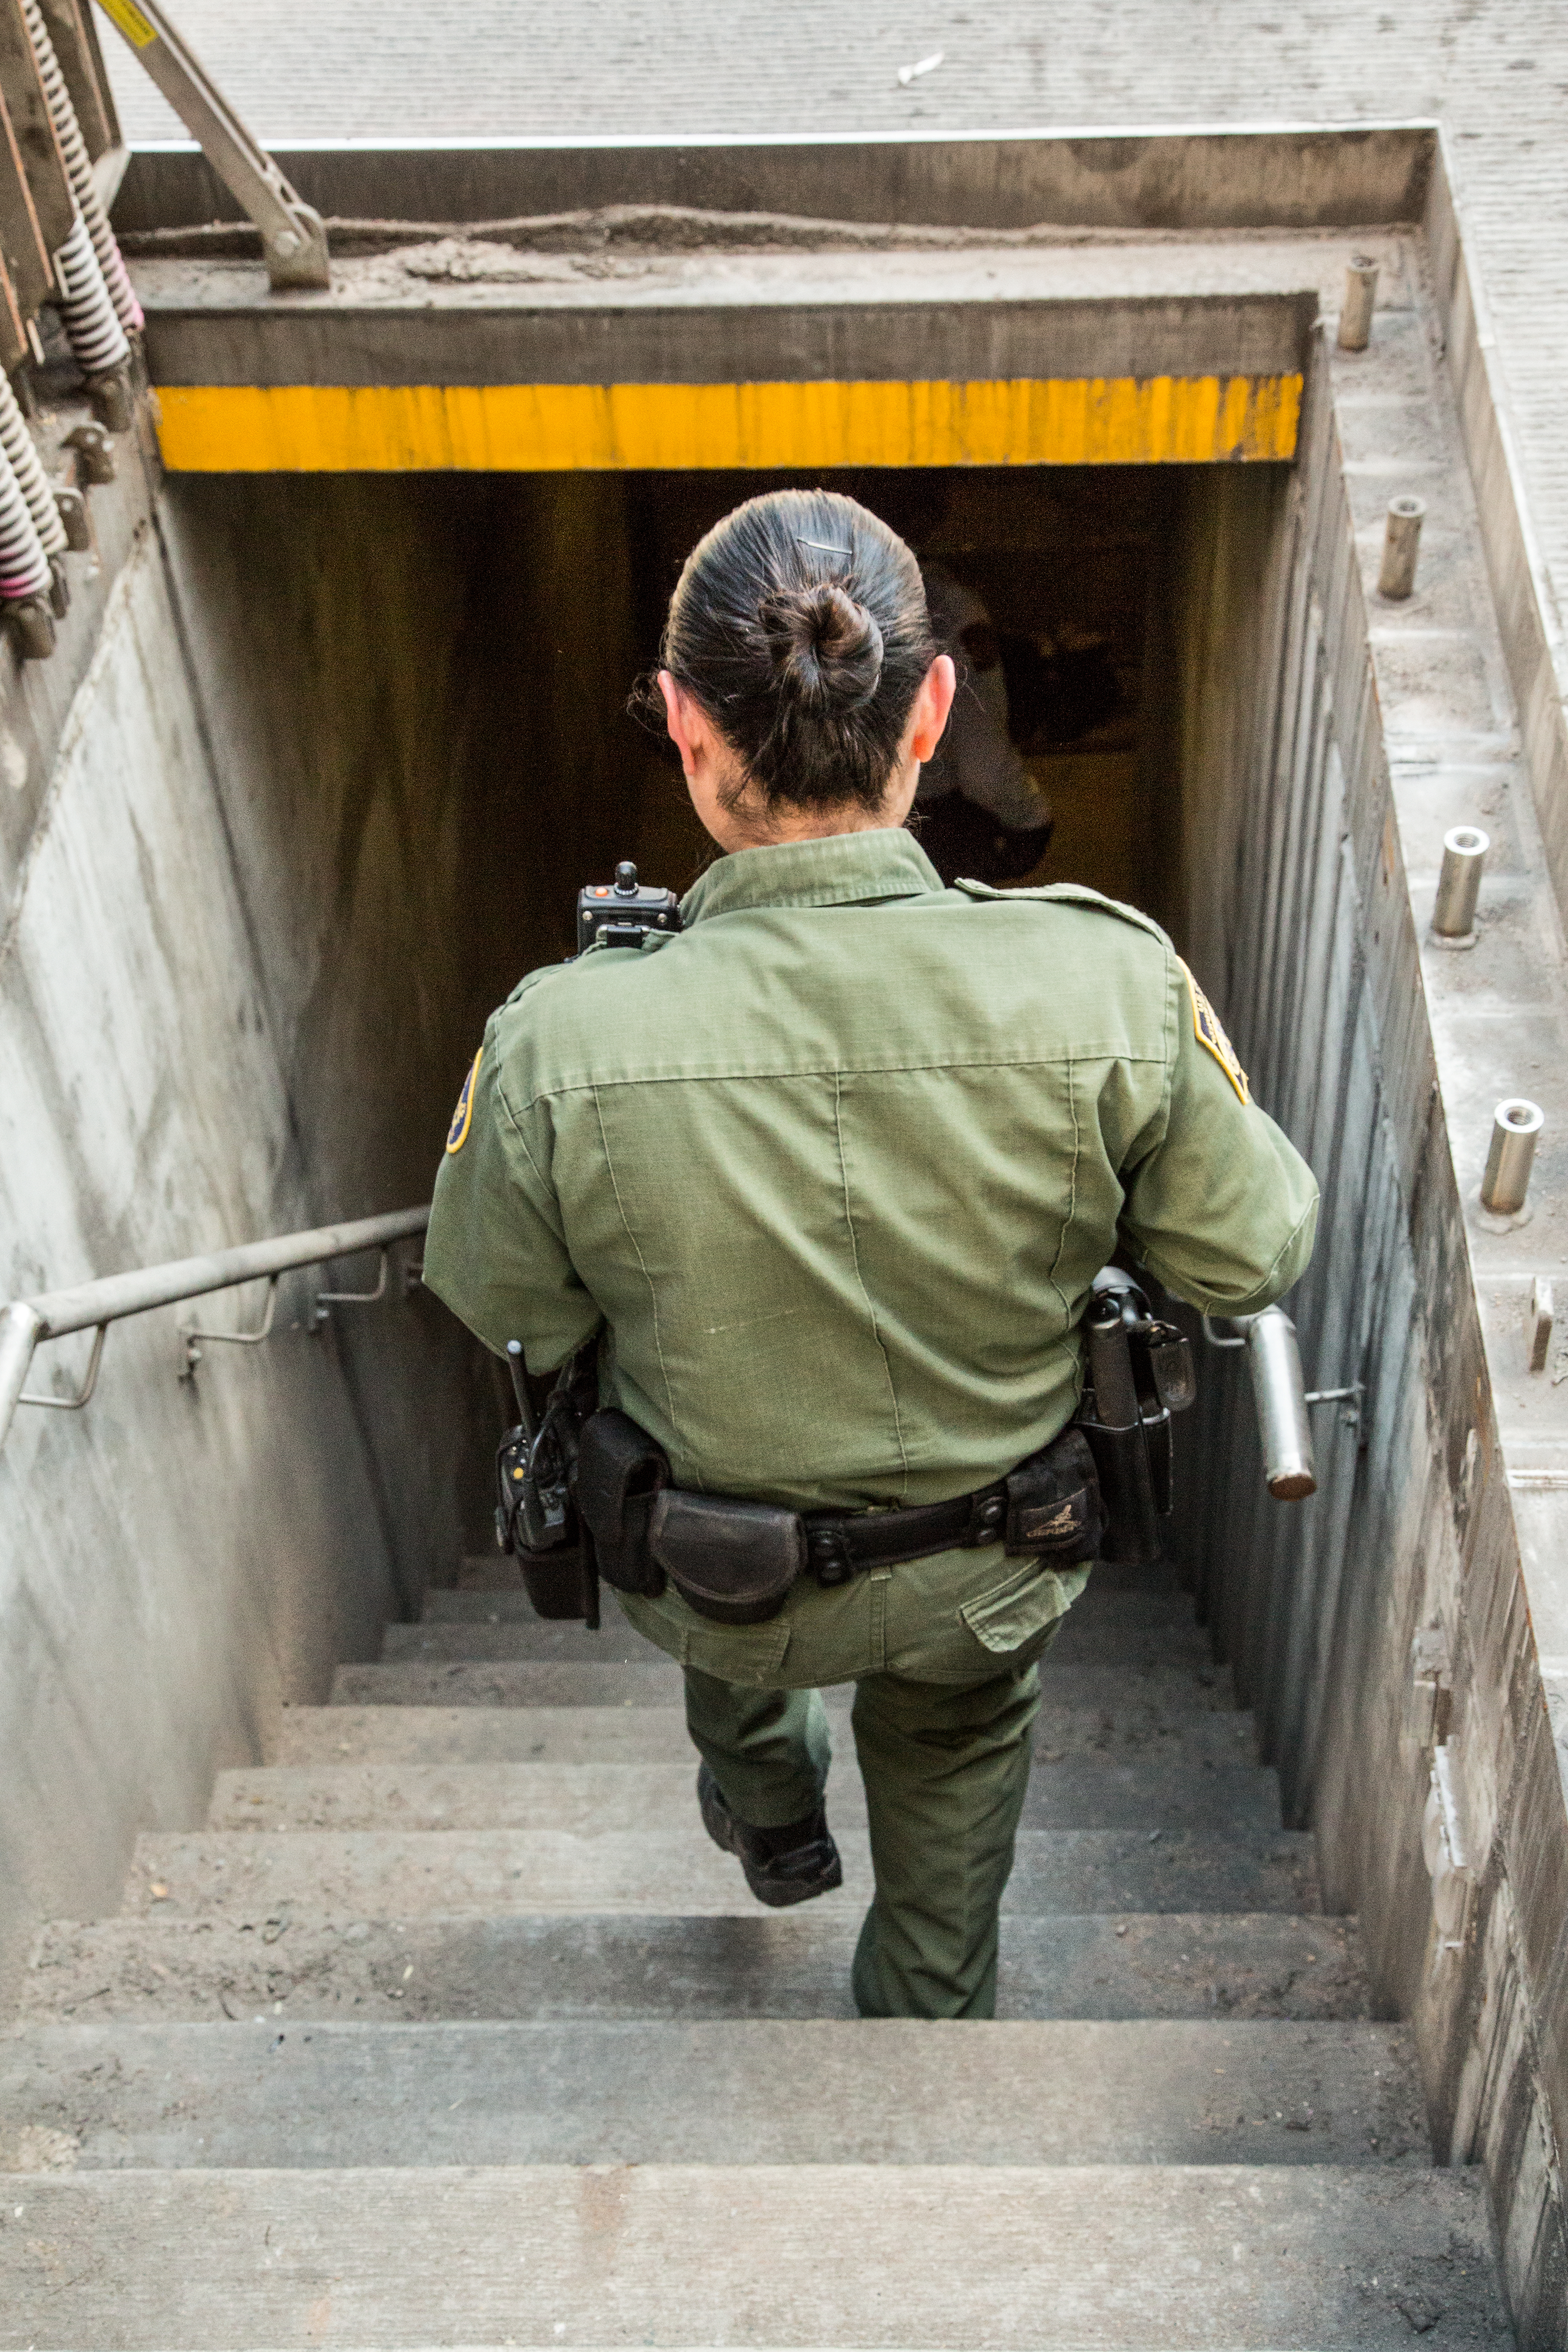 Border Patrol agent goes down stairs into drainage tunnel